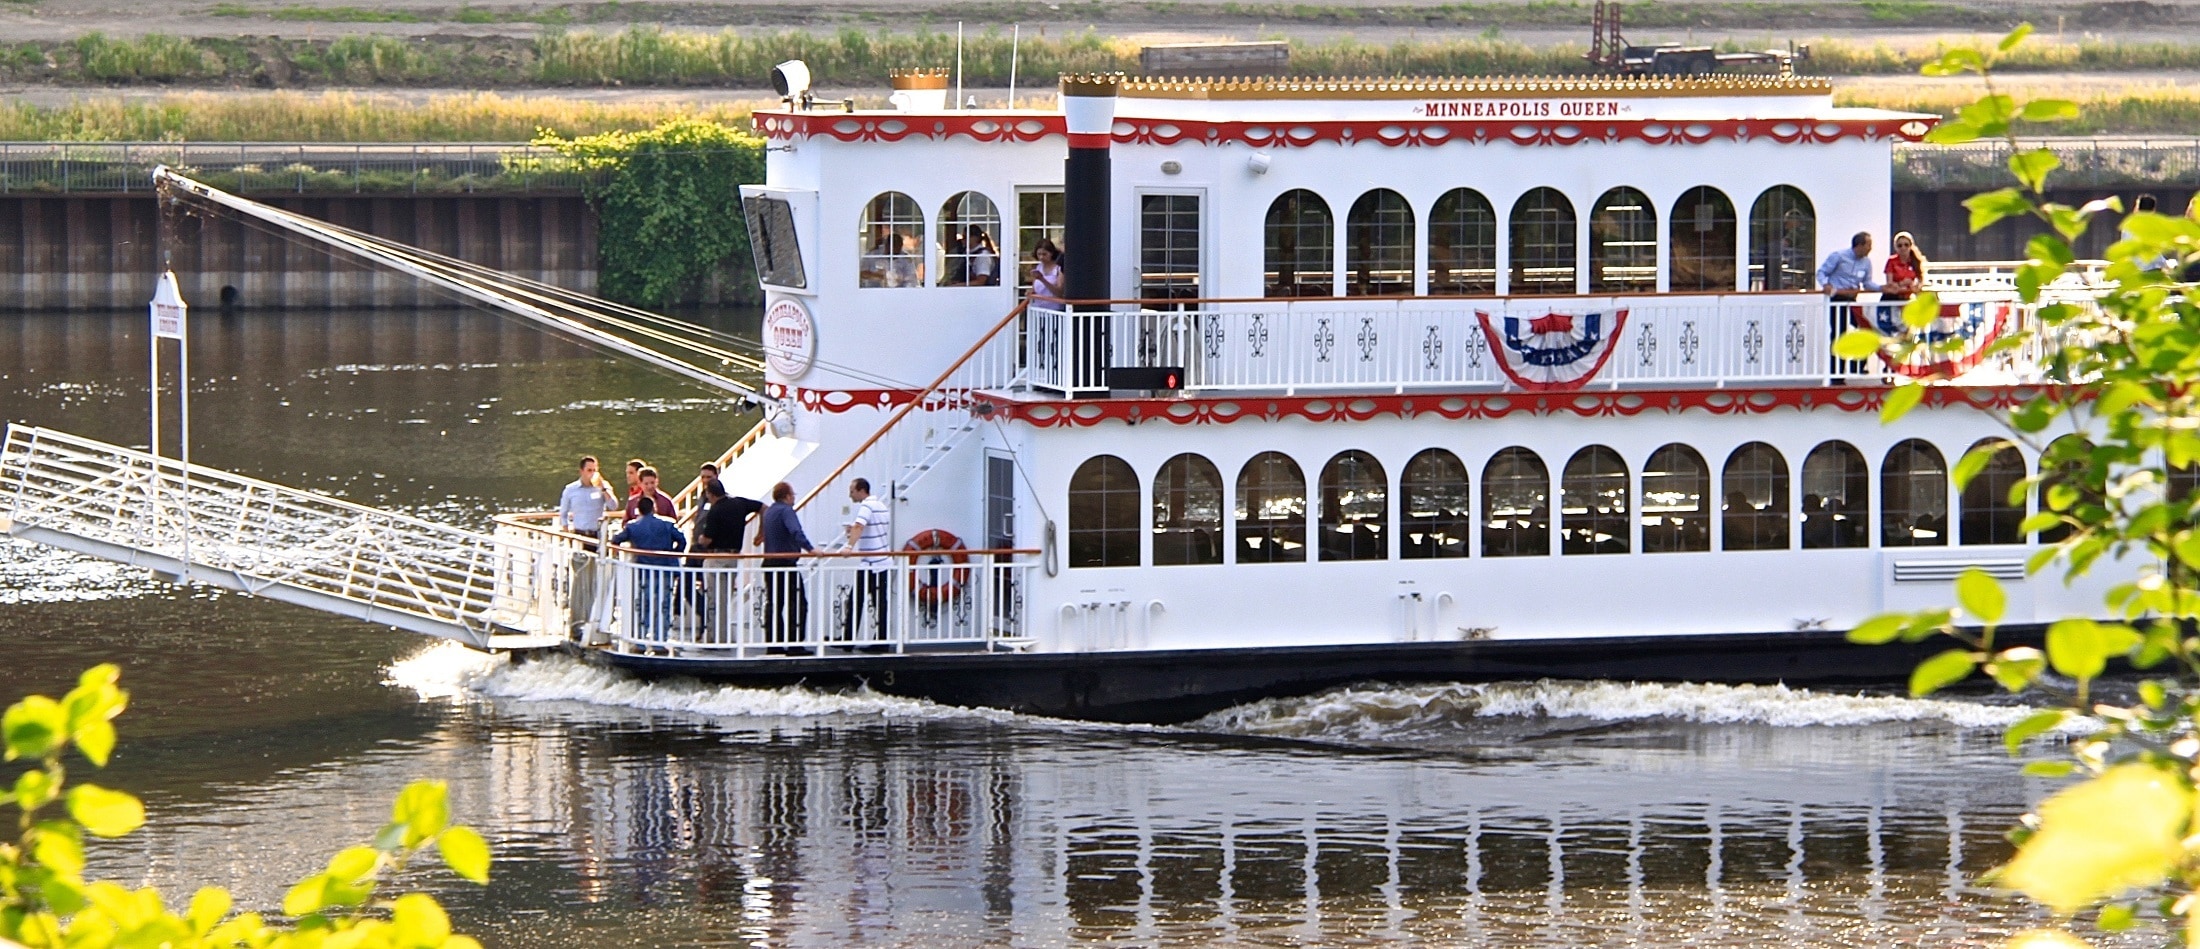 Nautical, Riverboat, River, Sightseeing, architecture, built structure